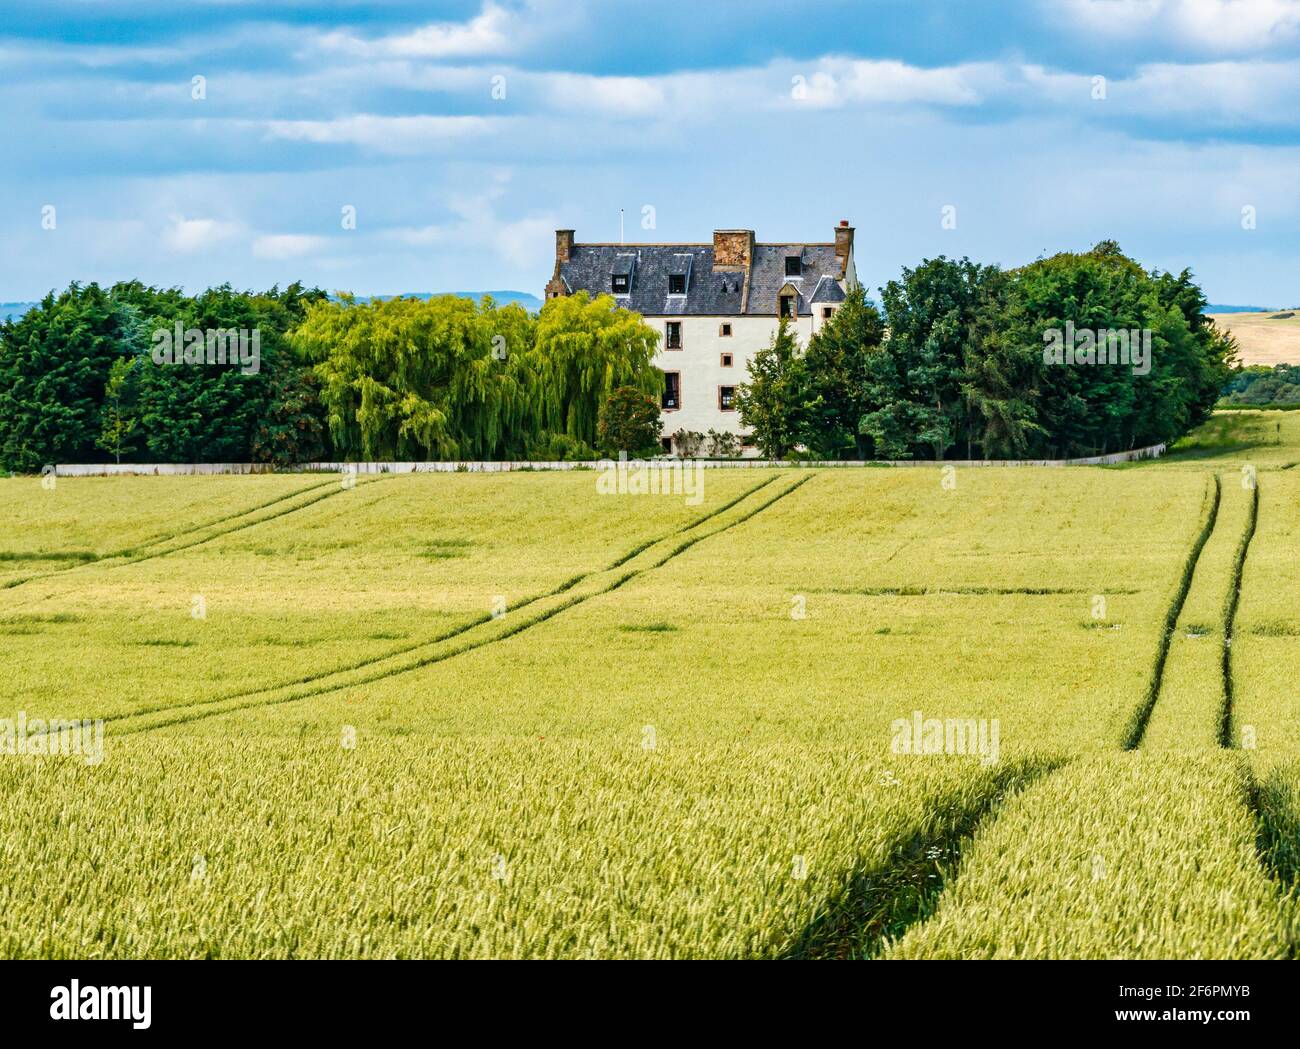 Ballencrieff Scots baronial style fortified house in wheat crop field in Summer agricultural landscape, East Lothian, Scotland, UK Stock Photo